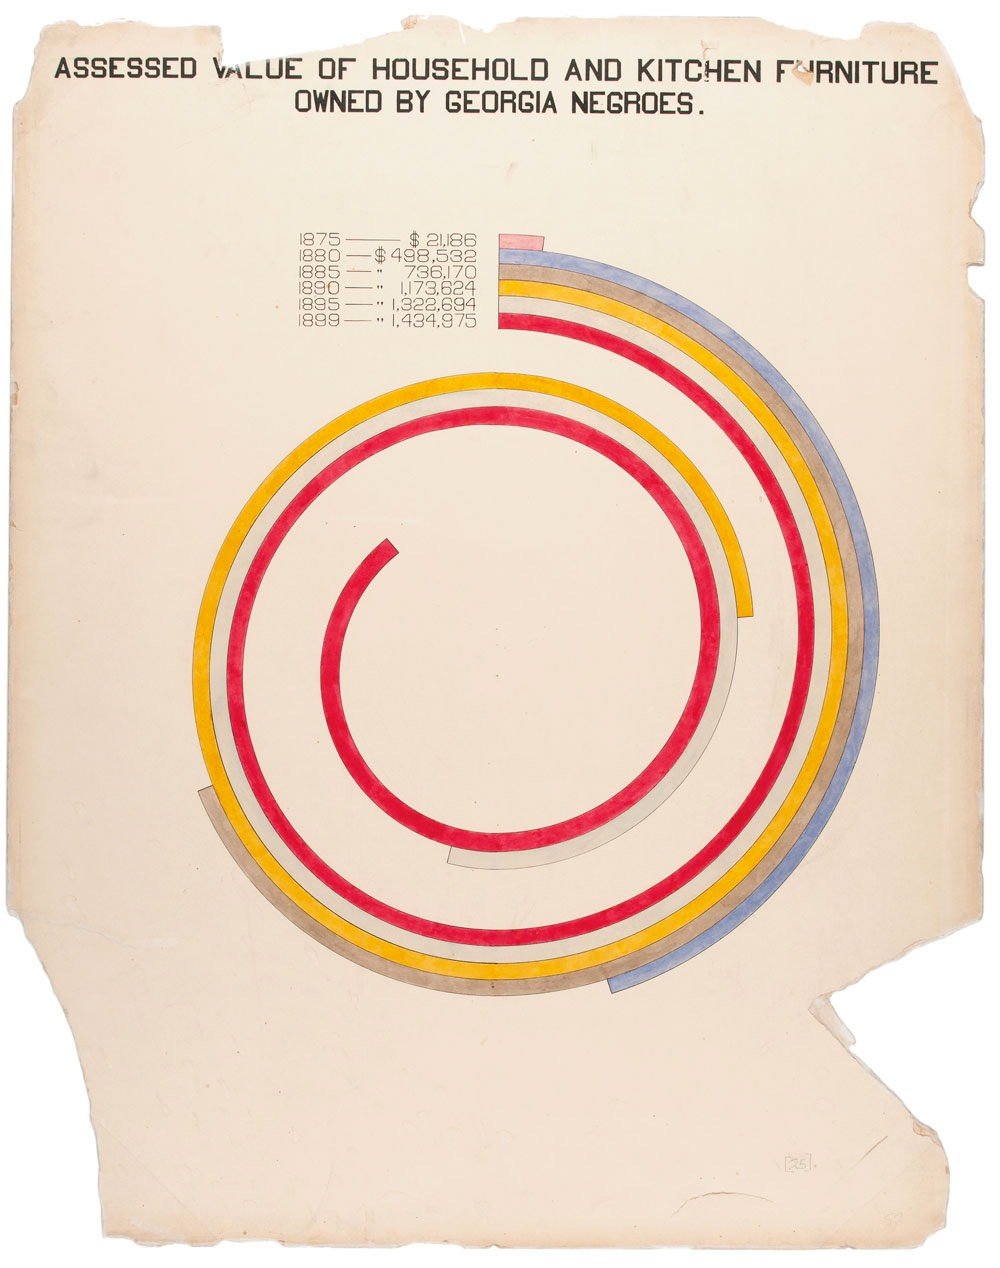 infographic designed by W.E.B. Du Bois titled 'Assessed value of household and kitchen furniture owned by Georgia negros'